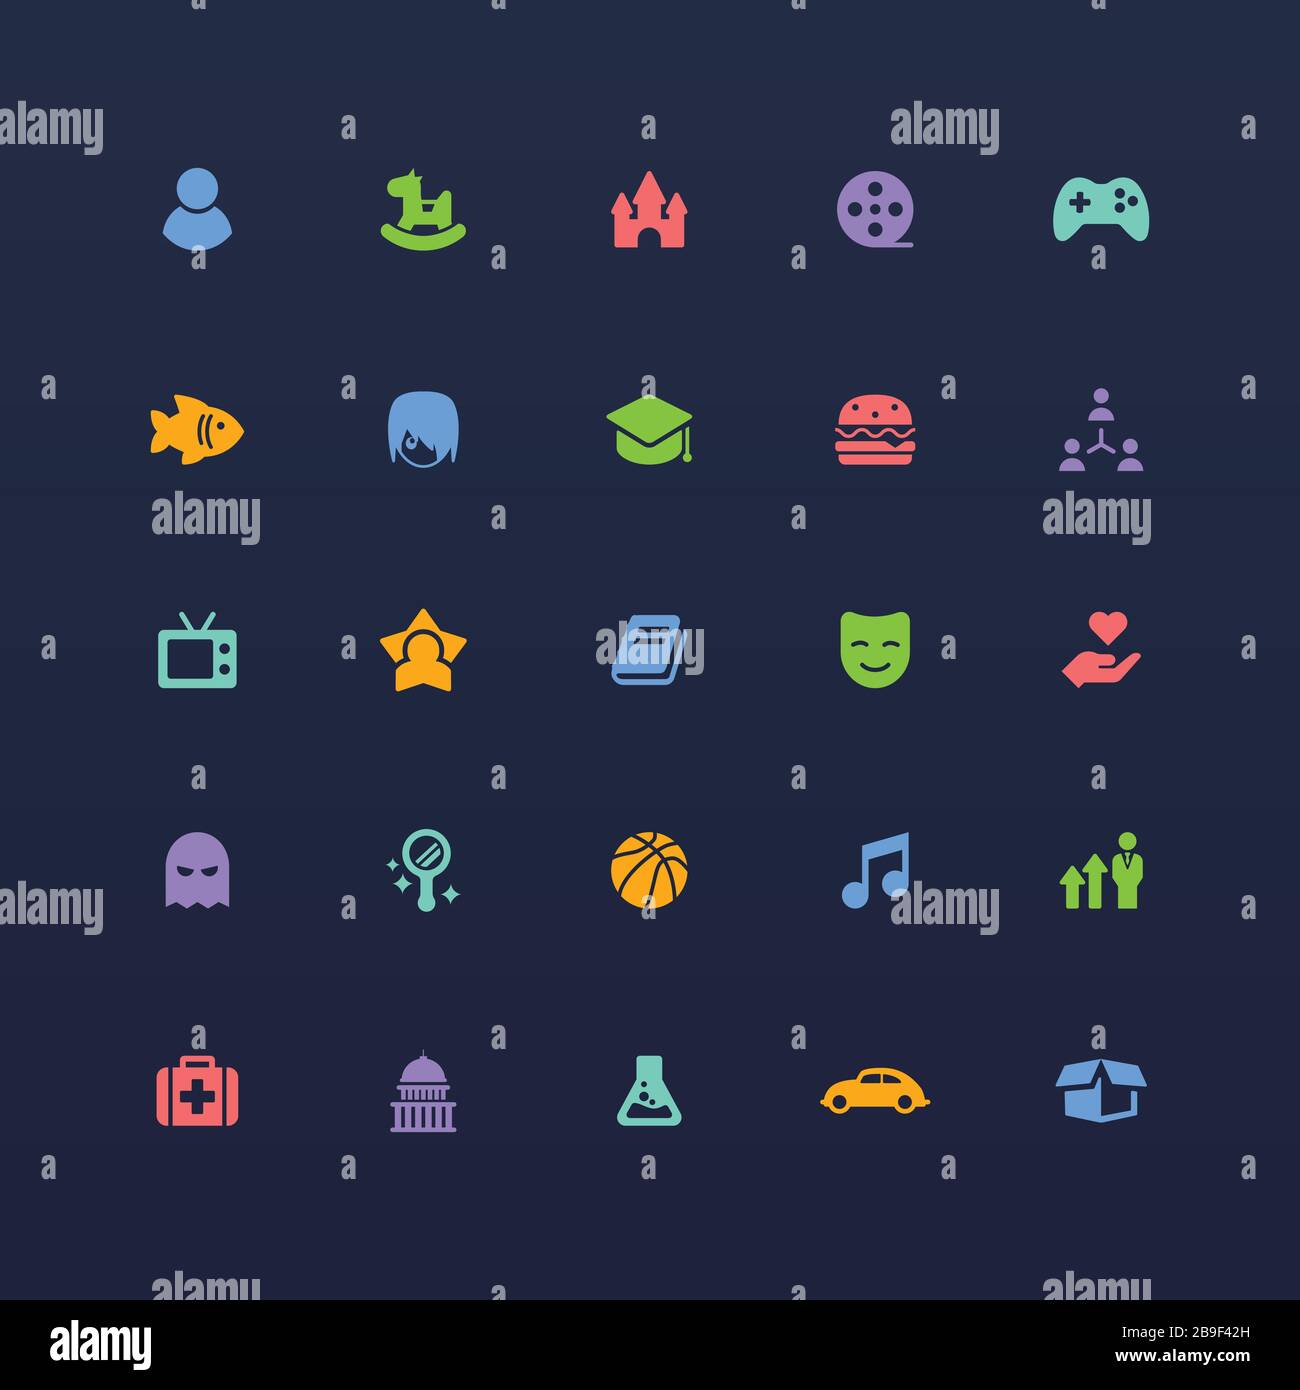 Category icons  Icon design inspiration, Icon design, Ui design inspiration